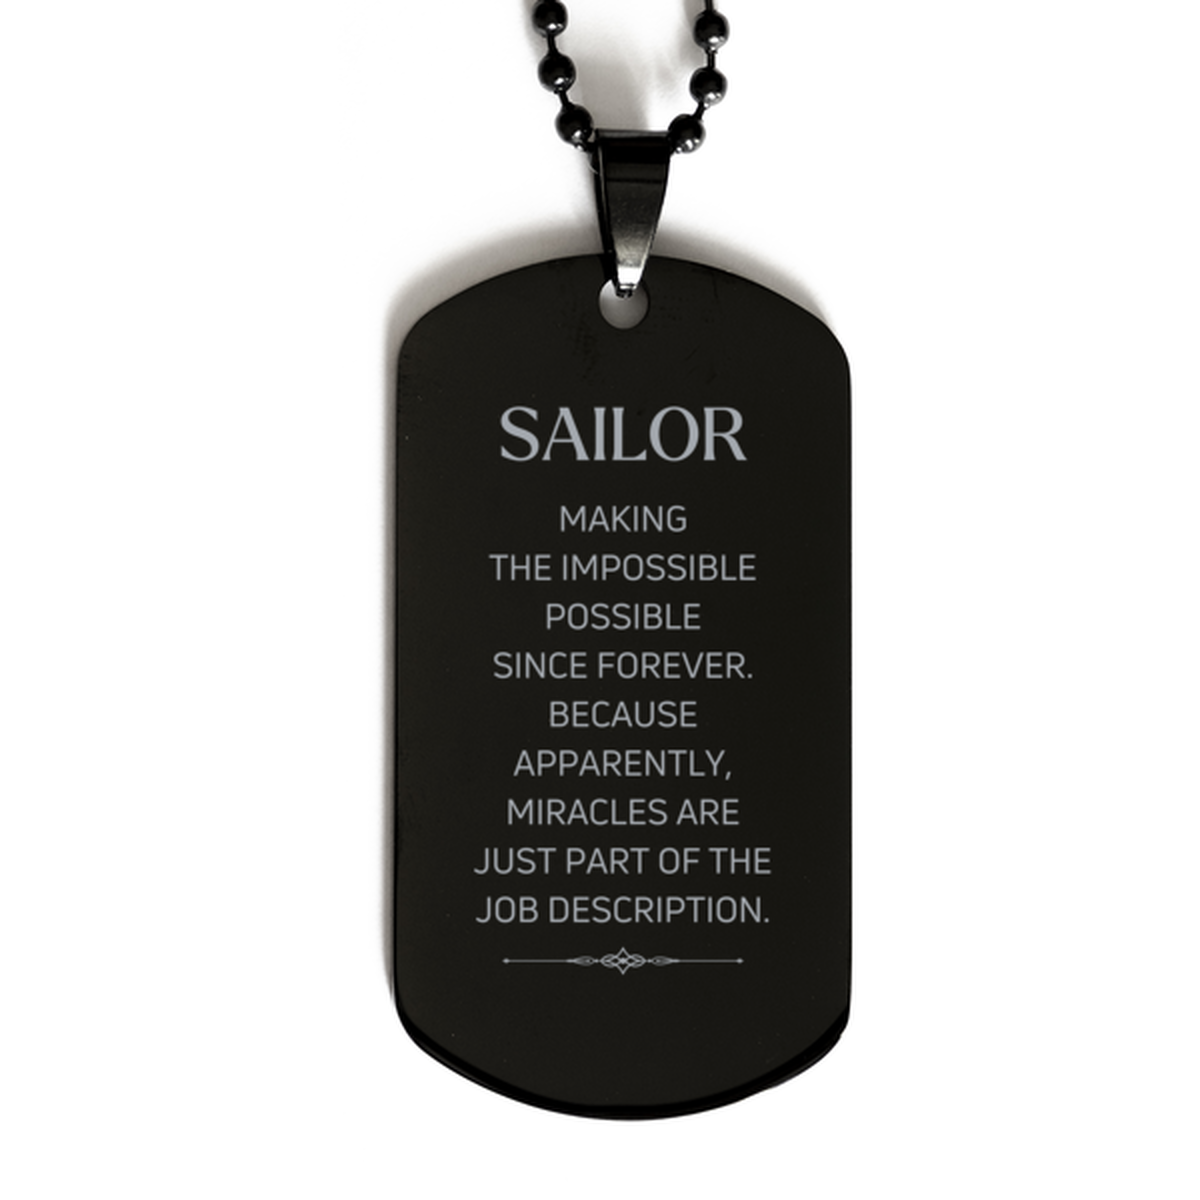 Funny Sailor Gifts, Miracles are just part of the job description, Inspirational Birthday Black Dog Tag For Sailor, Men, Women, Coworkers, Friends, Boss